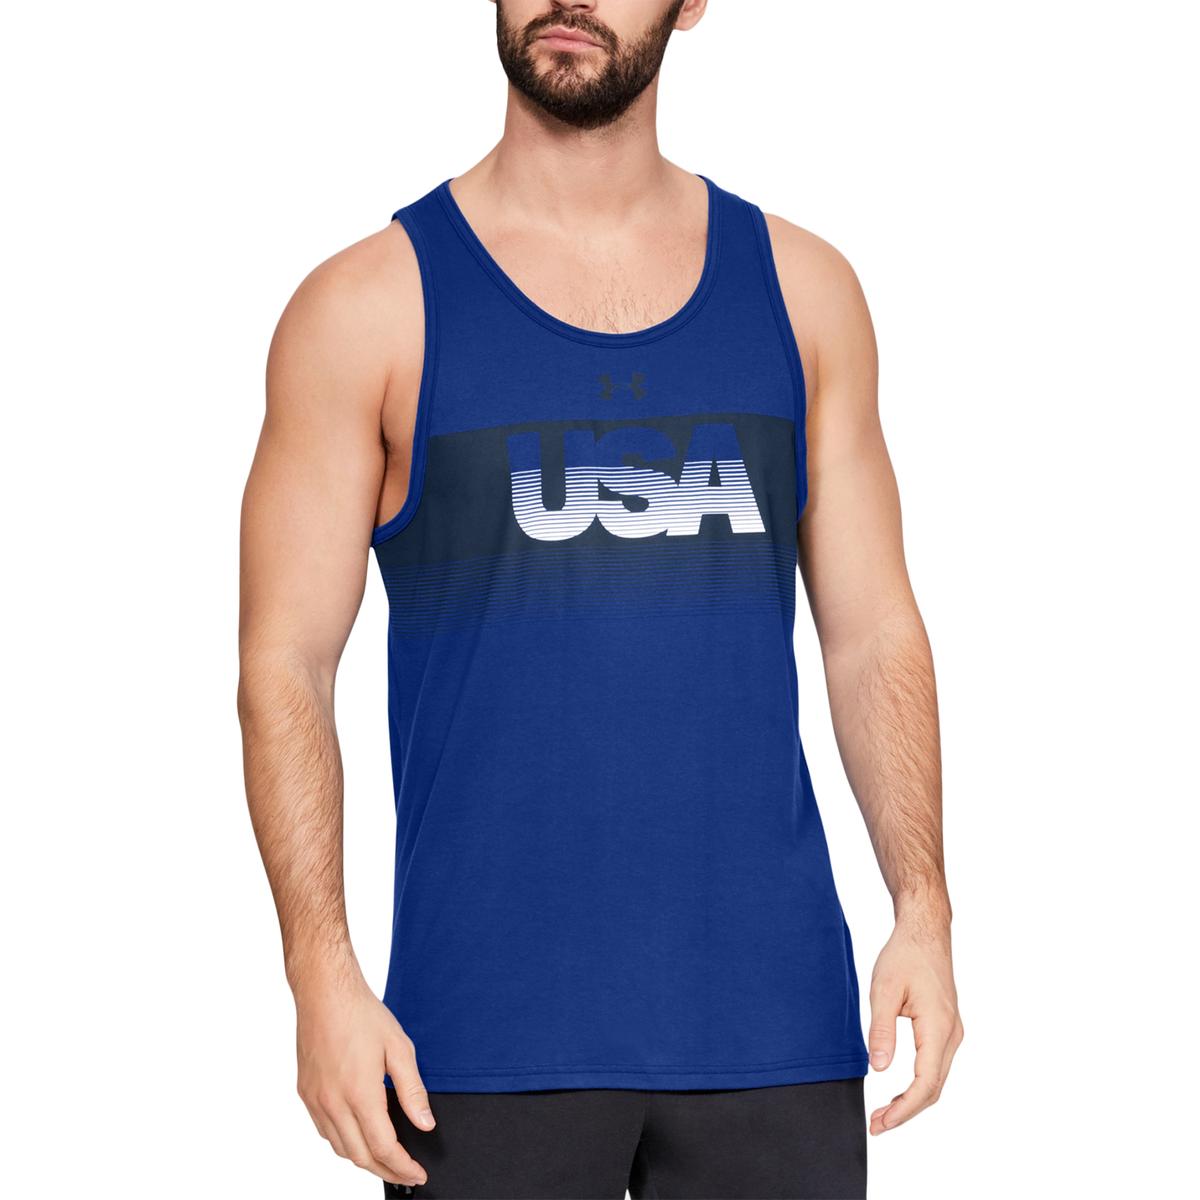 Under Armour Mens USA Blue Fitness Running Workout Tank Top Athletic M ...